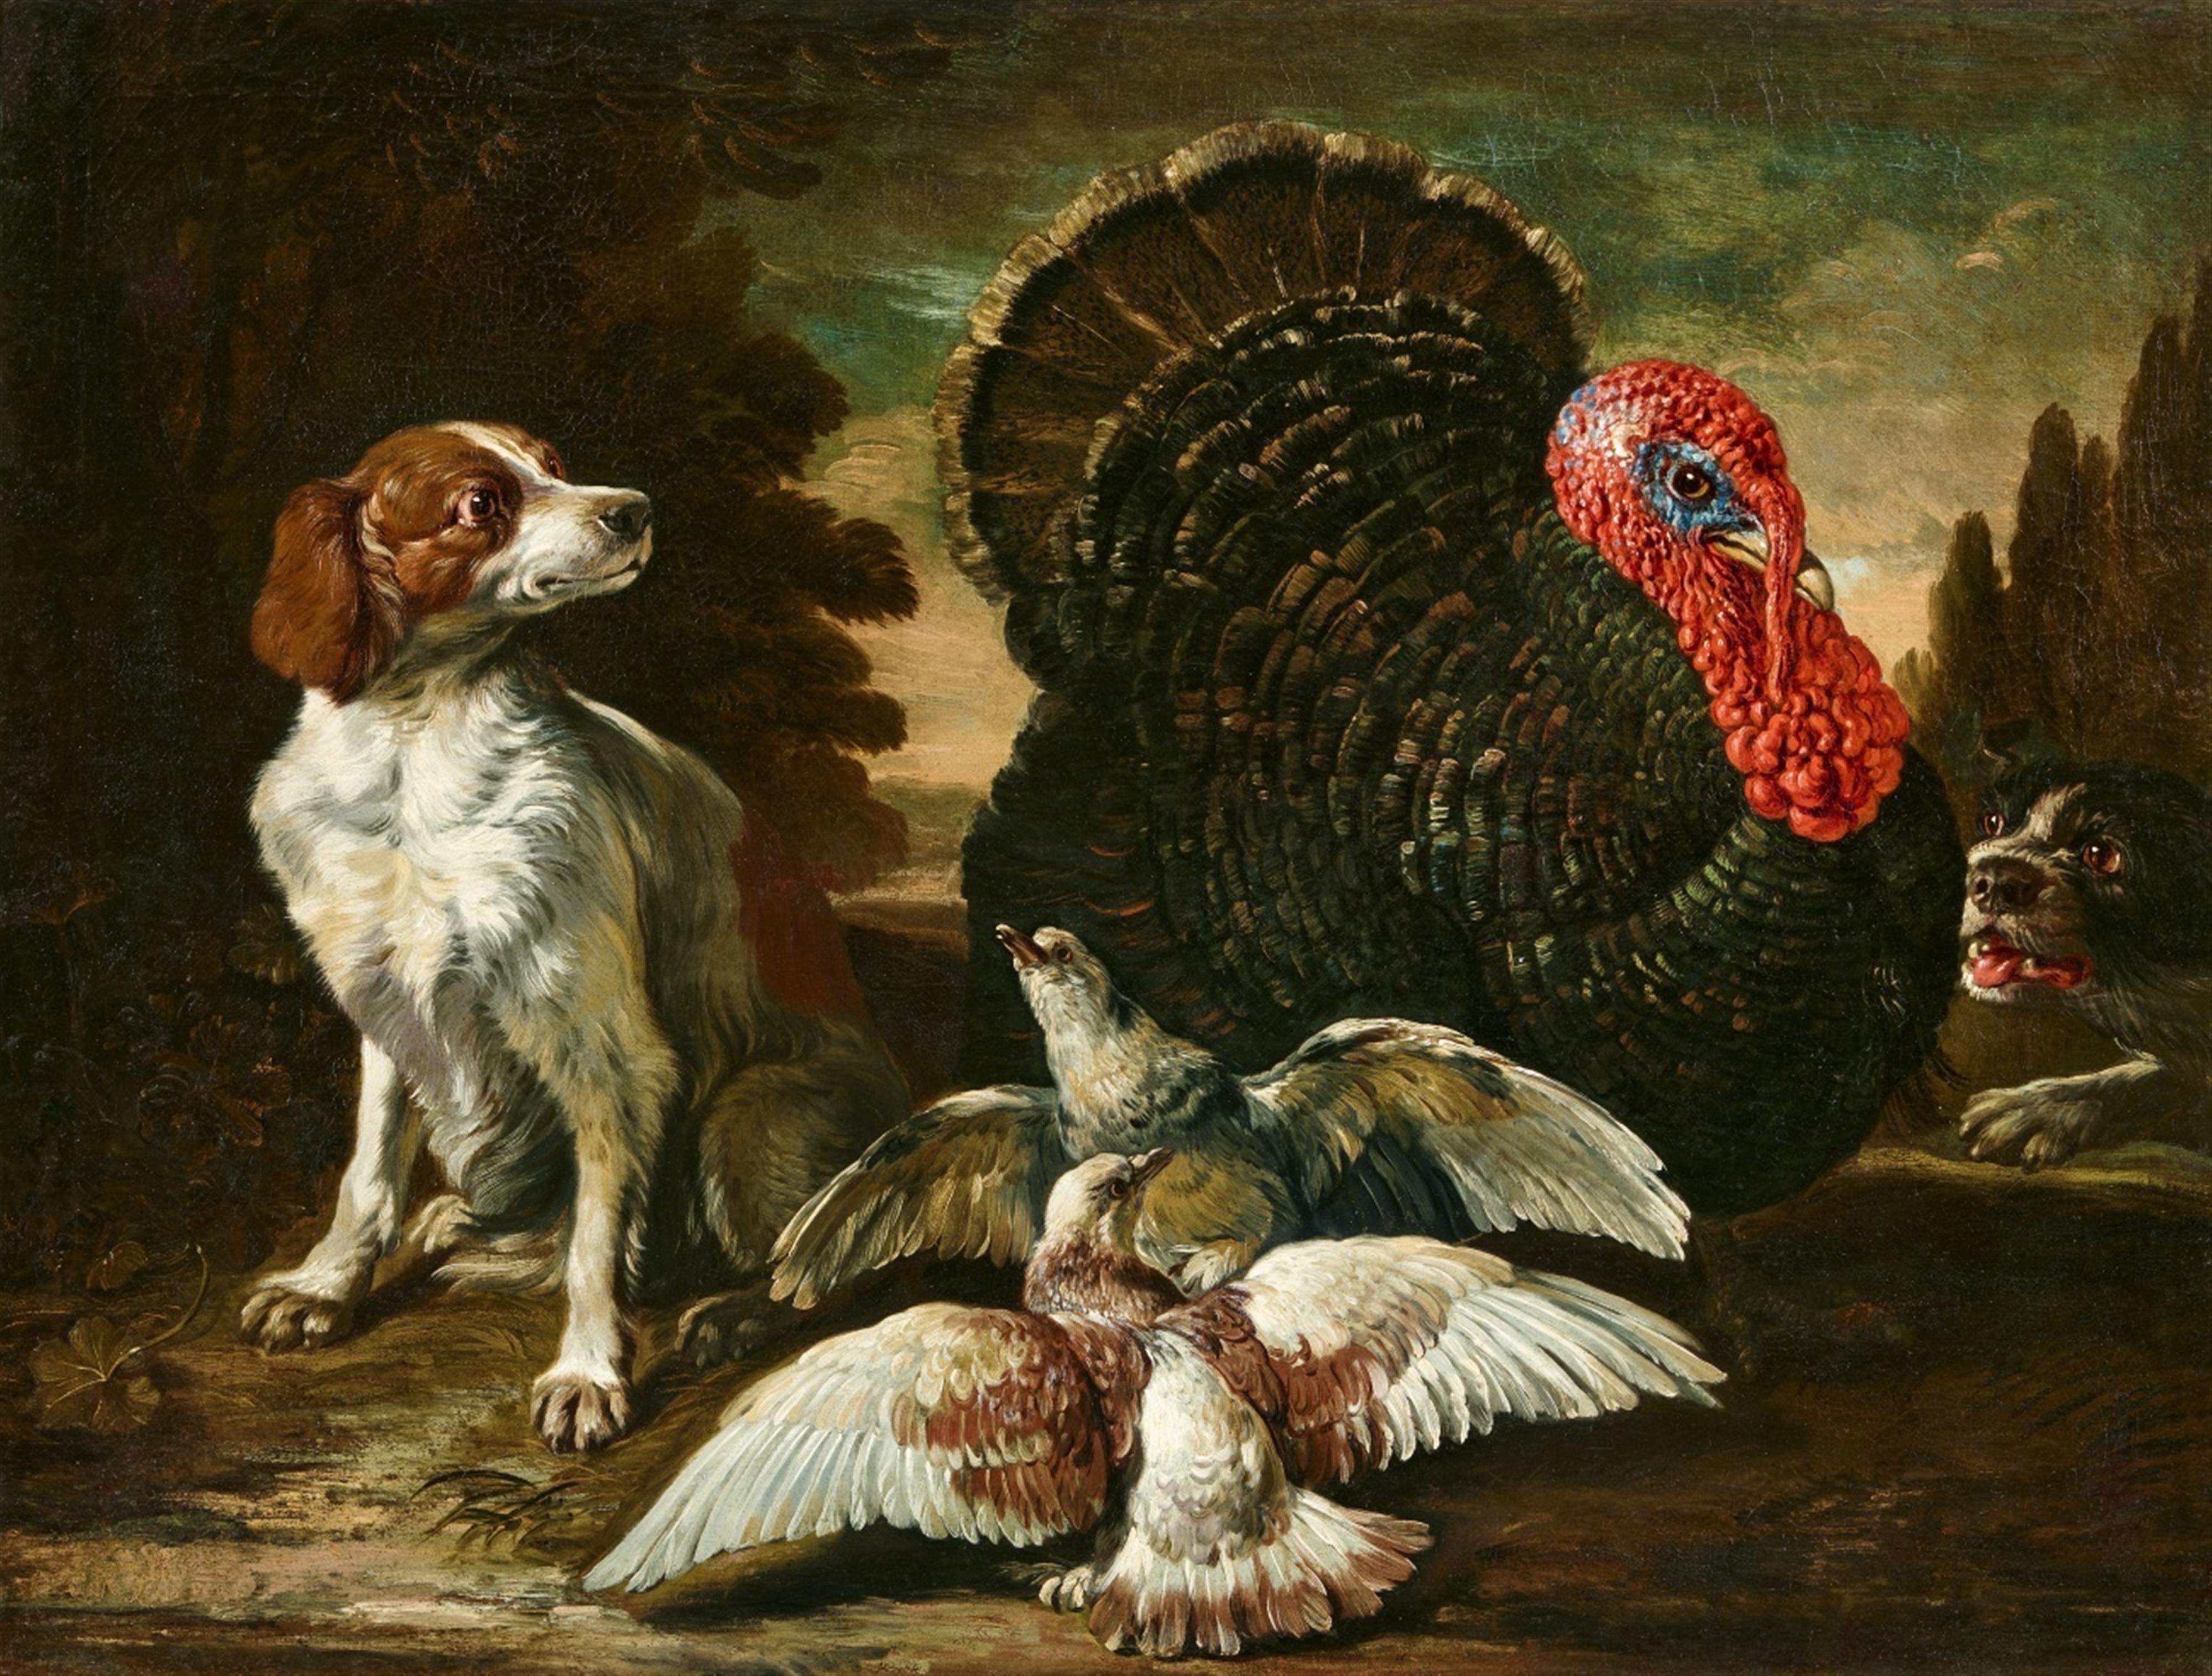 David de Coninck - A Turkey, Two Dogs and Two Pigeons in Front of a Landscape
A Peacock, Two Chickens and Two Rabbits in Front of a Landscape